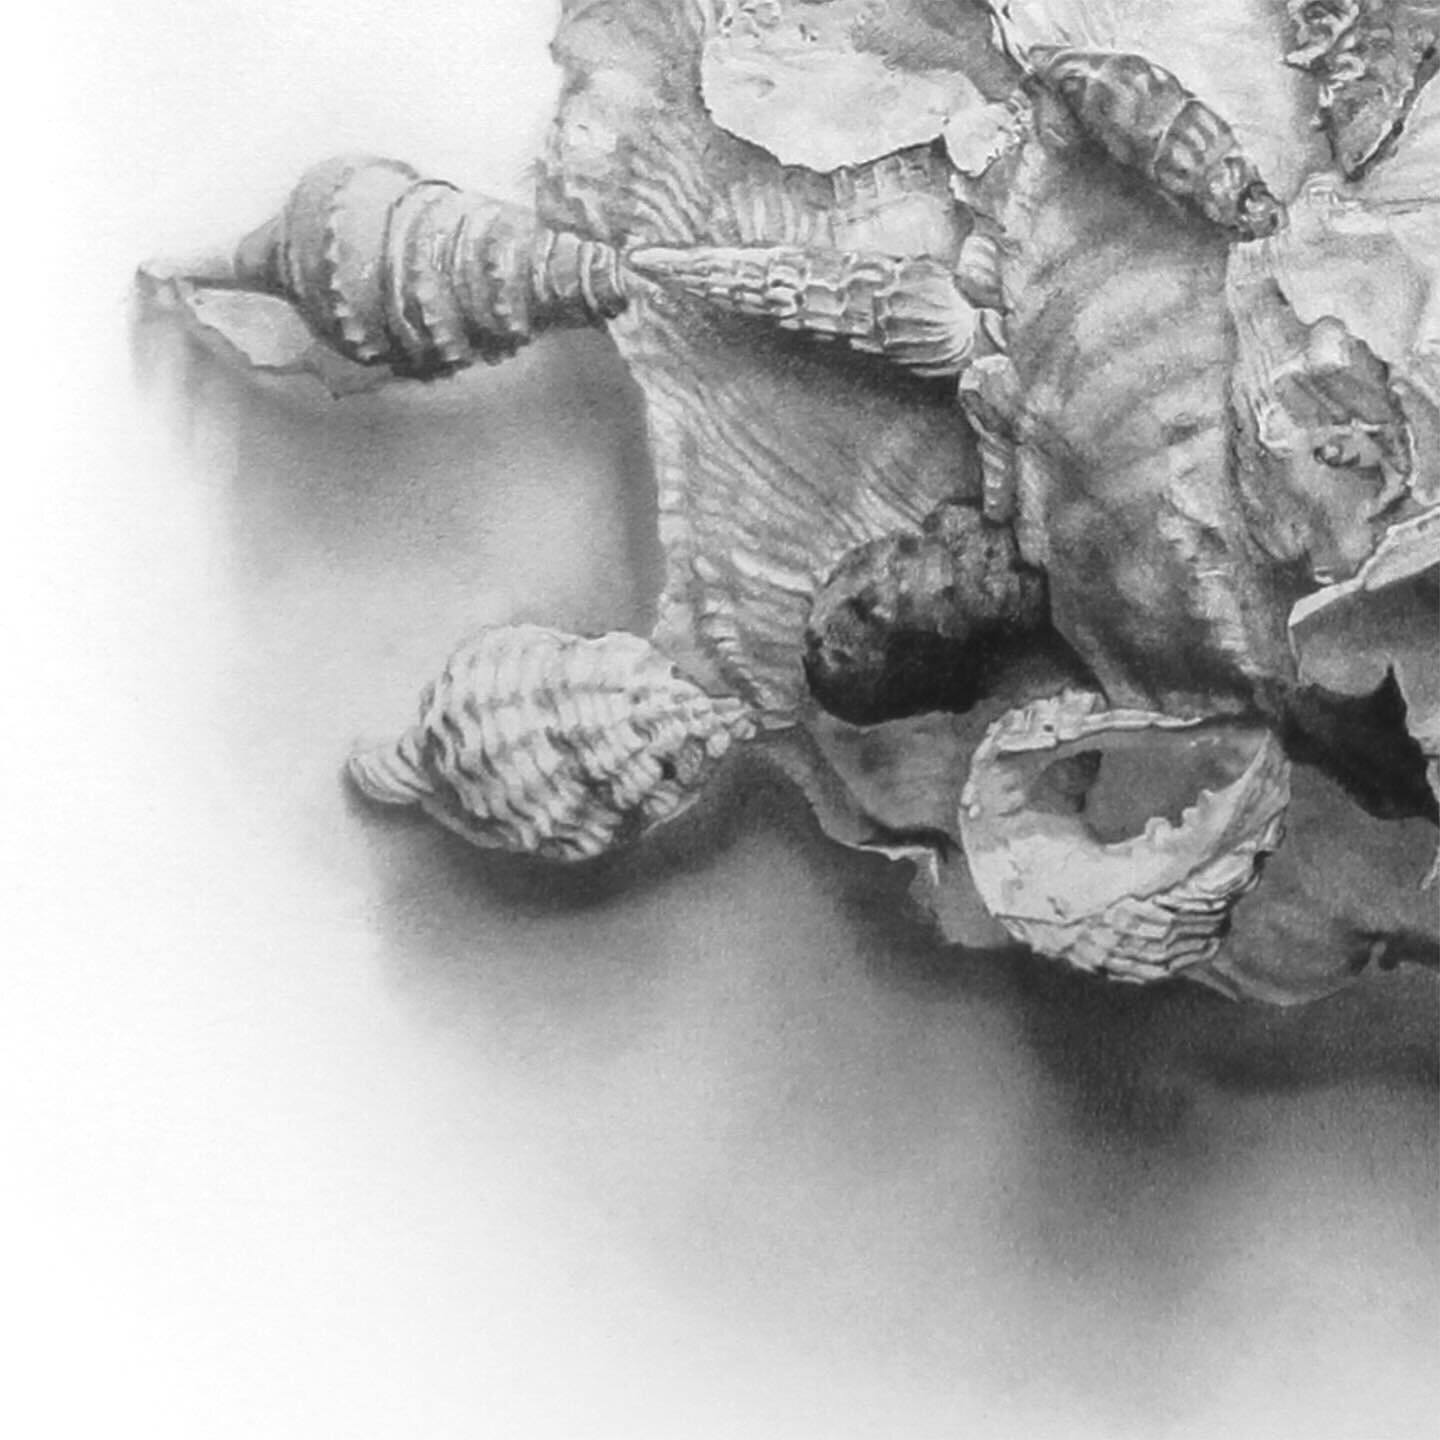 I love a good detailed shot ✏️ 

Carrier shell pencil drawing